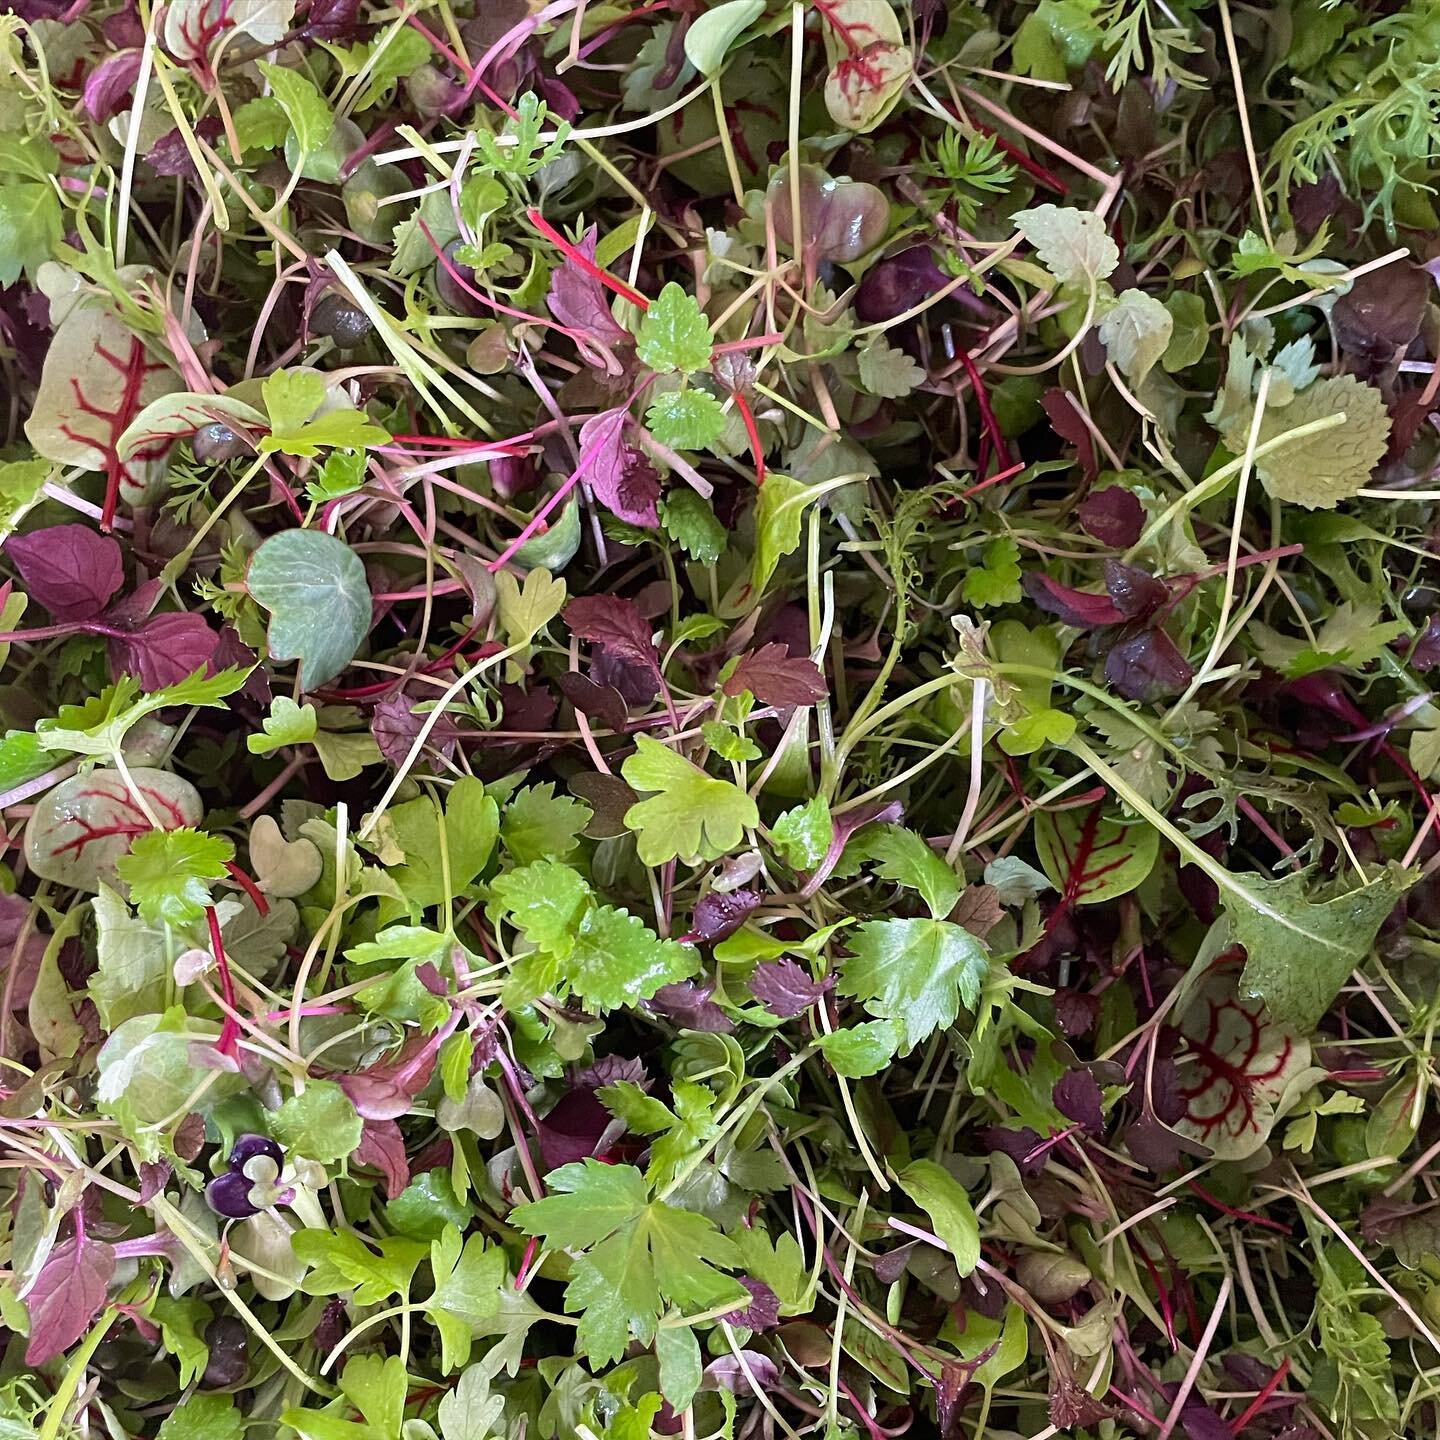 Micro Salad mix anyone? Our mix was getting pretty popular before lockdown 2.0! 

We are using the downtime right now to take a look at our processes and how we can make them better. One of those processes is the pre-cut mix. After a few failed attem